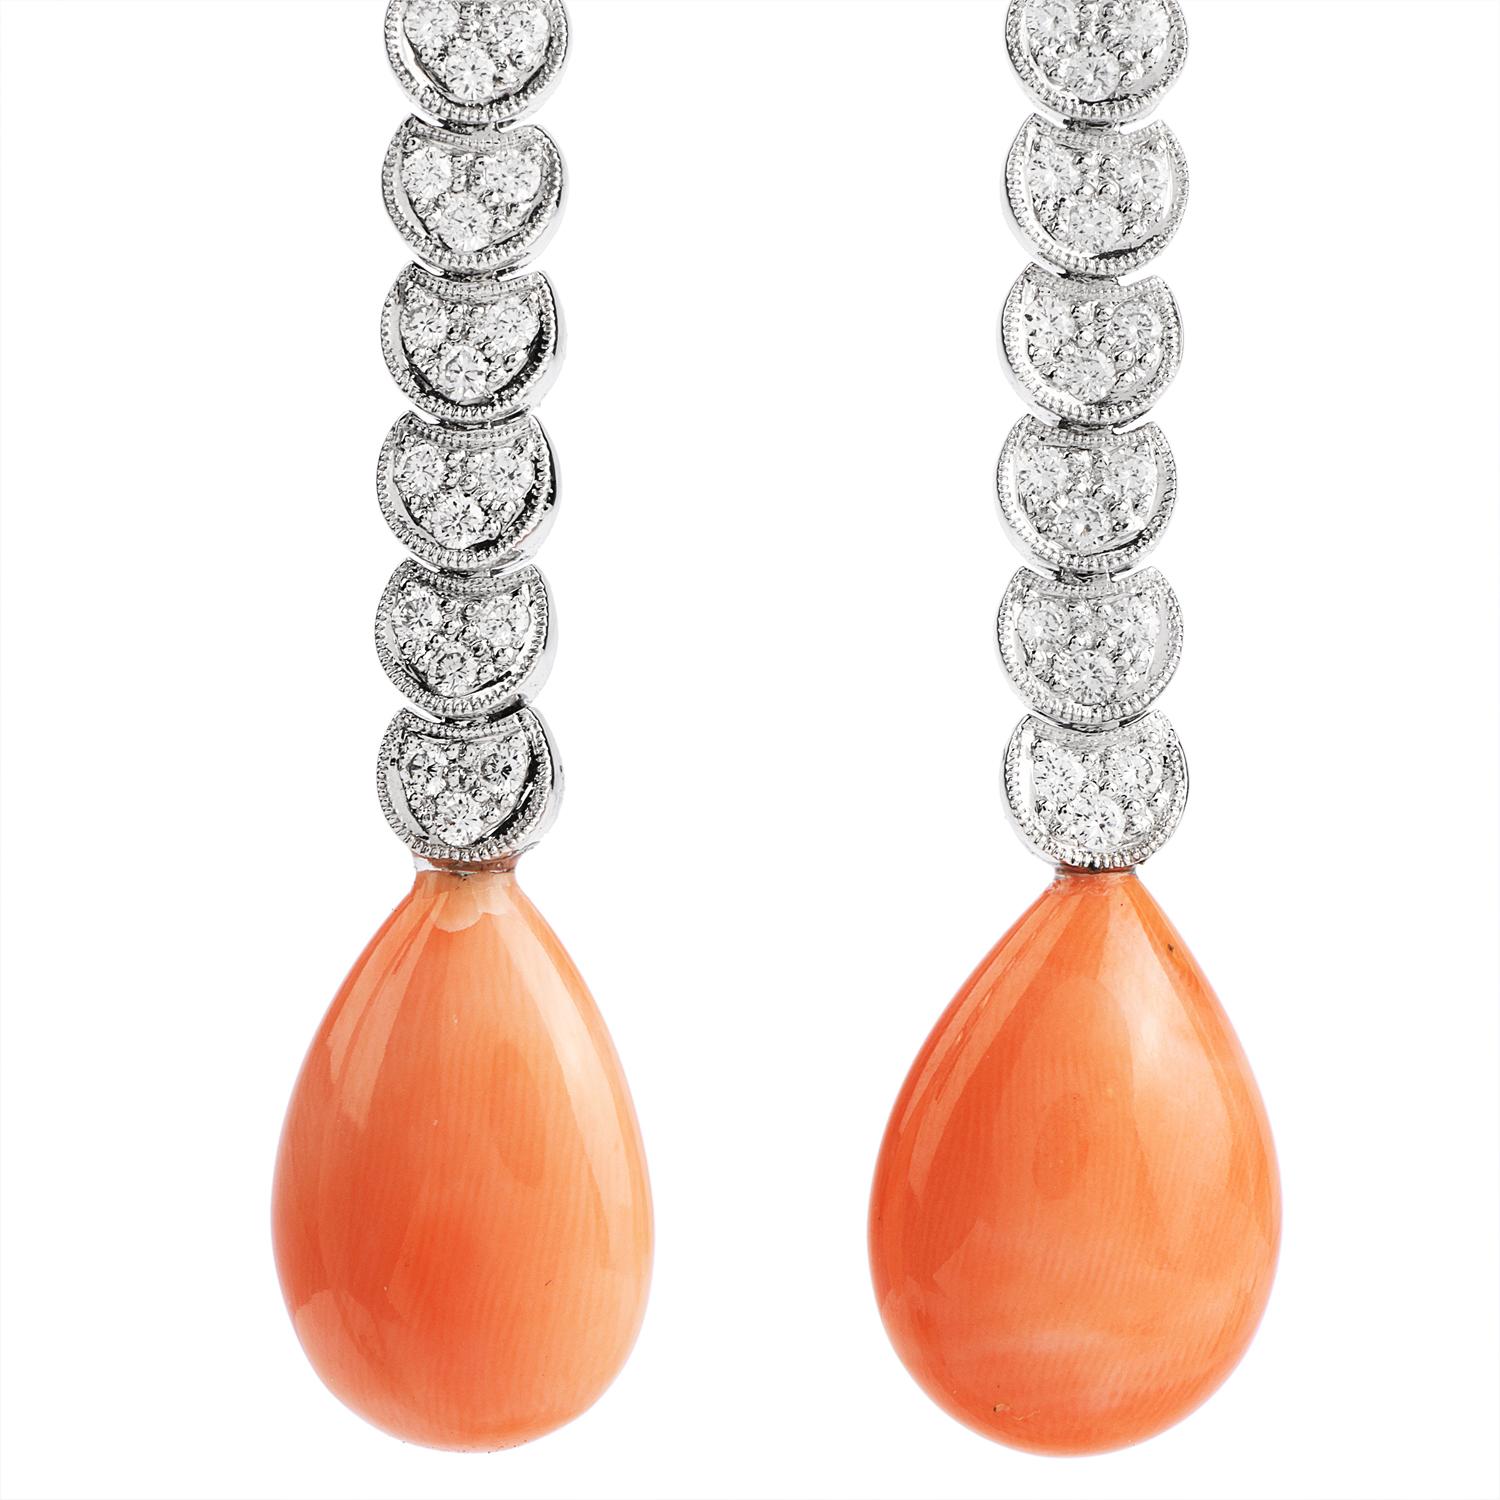  Soft Pink Colored Coral tear drops Clip On to the ear while 

large dangling diamonds dangle freely.

contrasting bright white round diamonds totaling approx. 0.56 carats.

Graded G-H color and VS2-SI1 clarity.

Secured with Clip On backs.

These